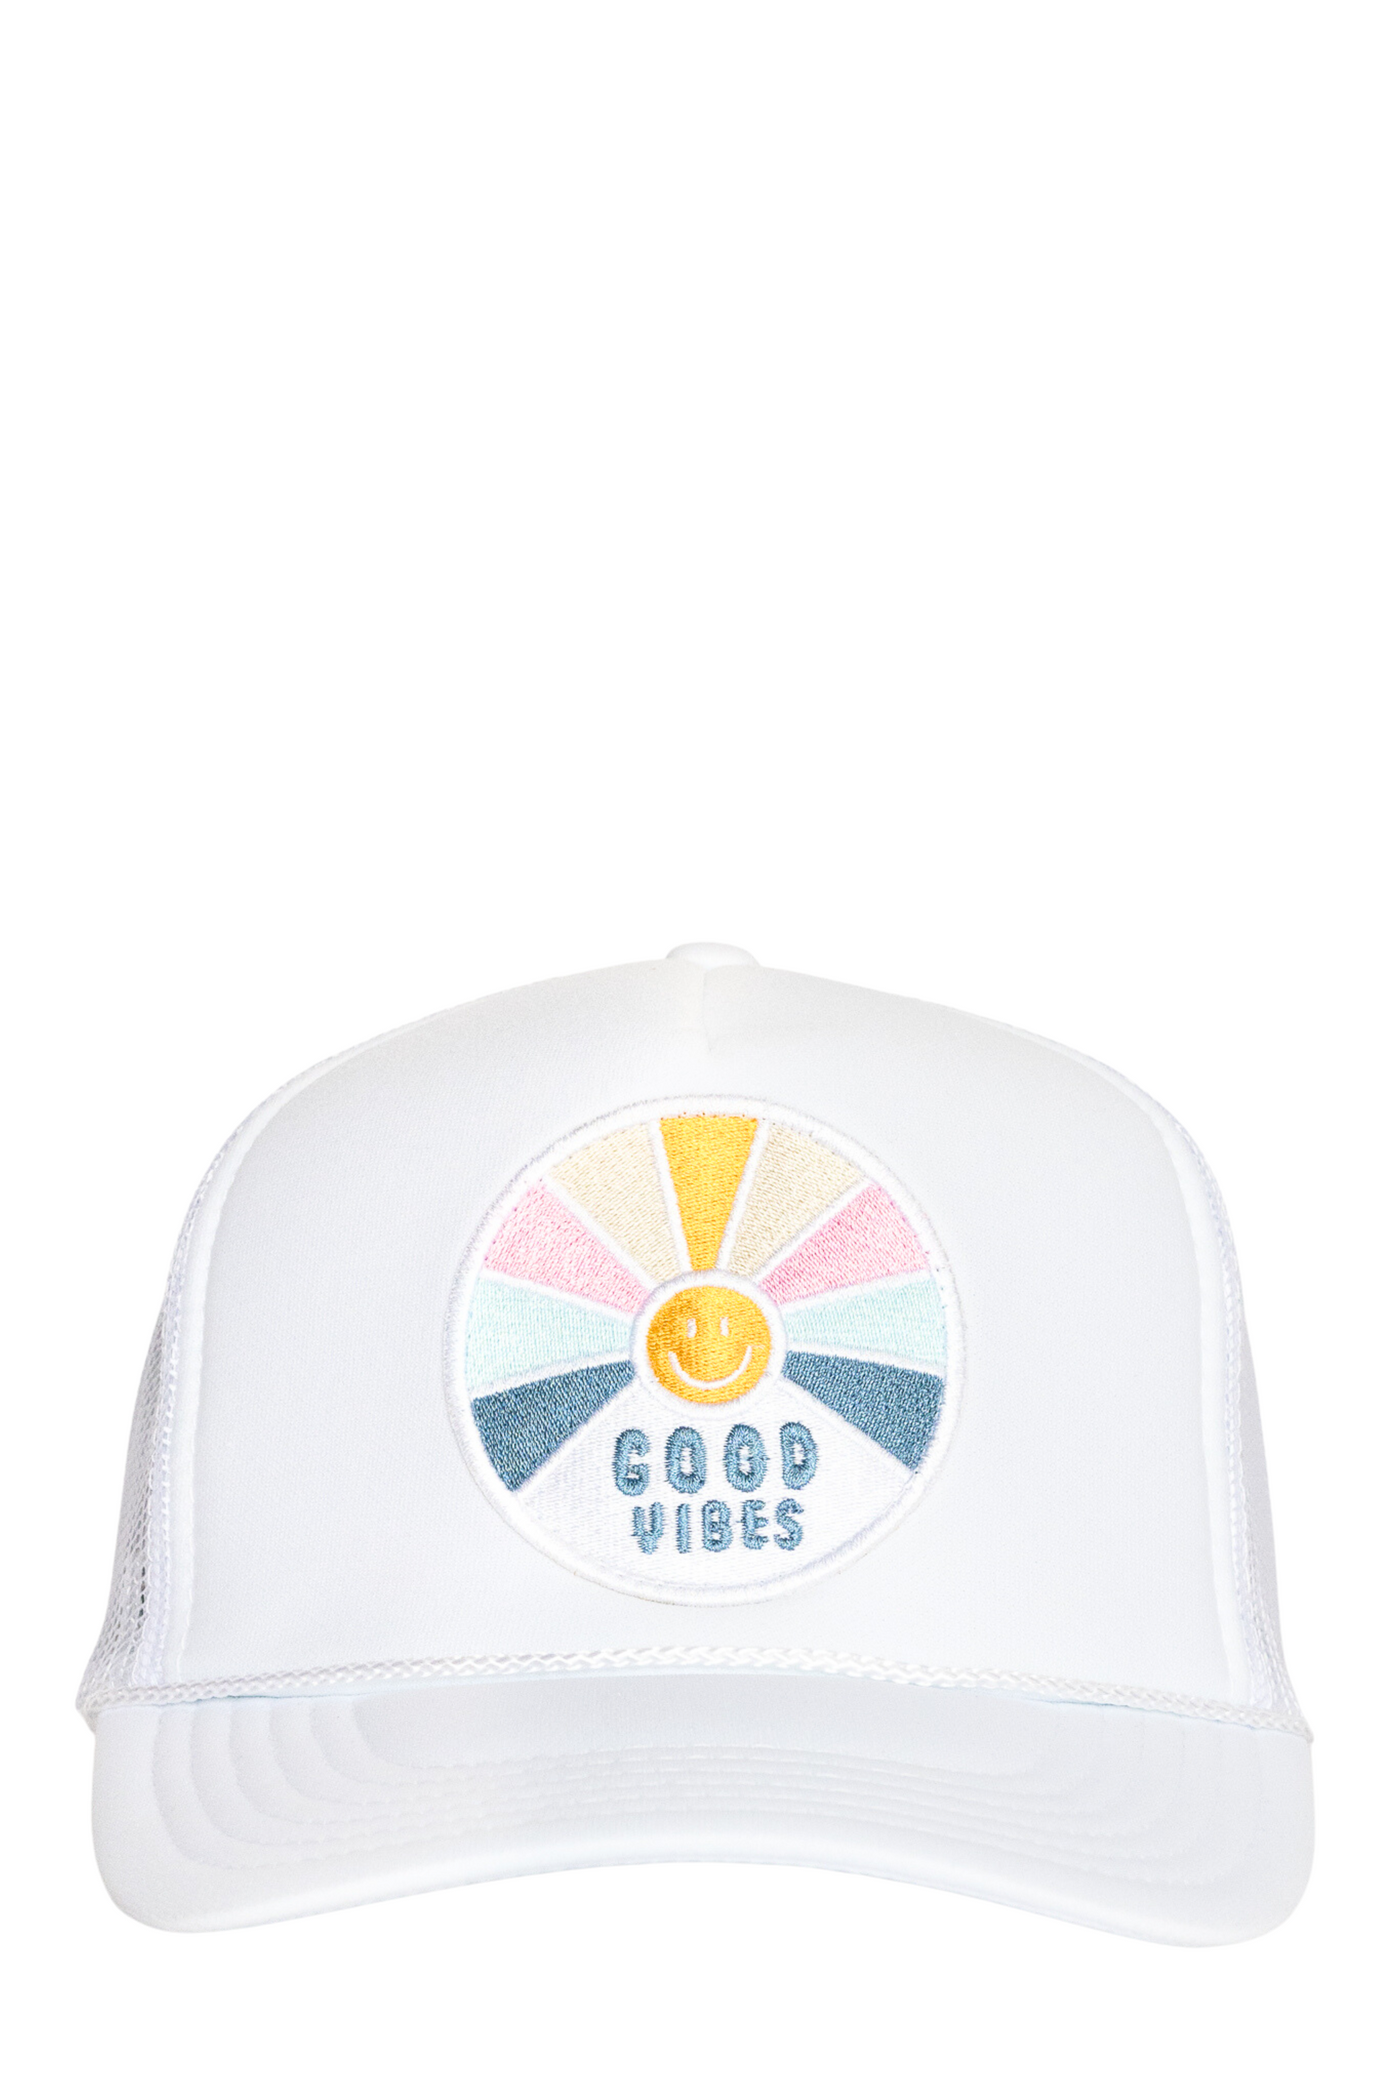 Good Vibes Youth Hat